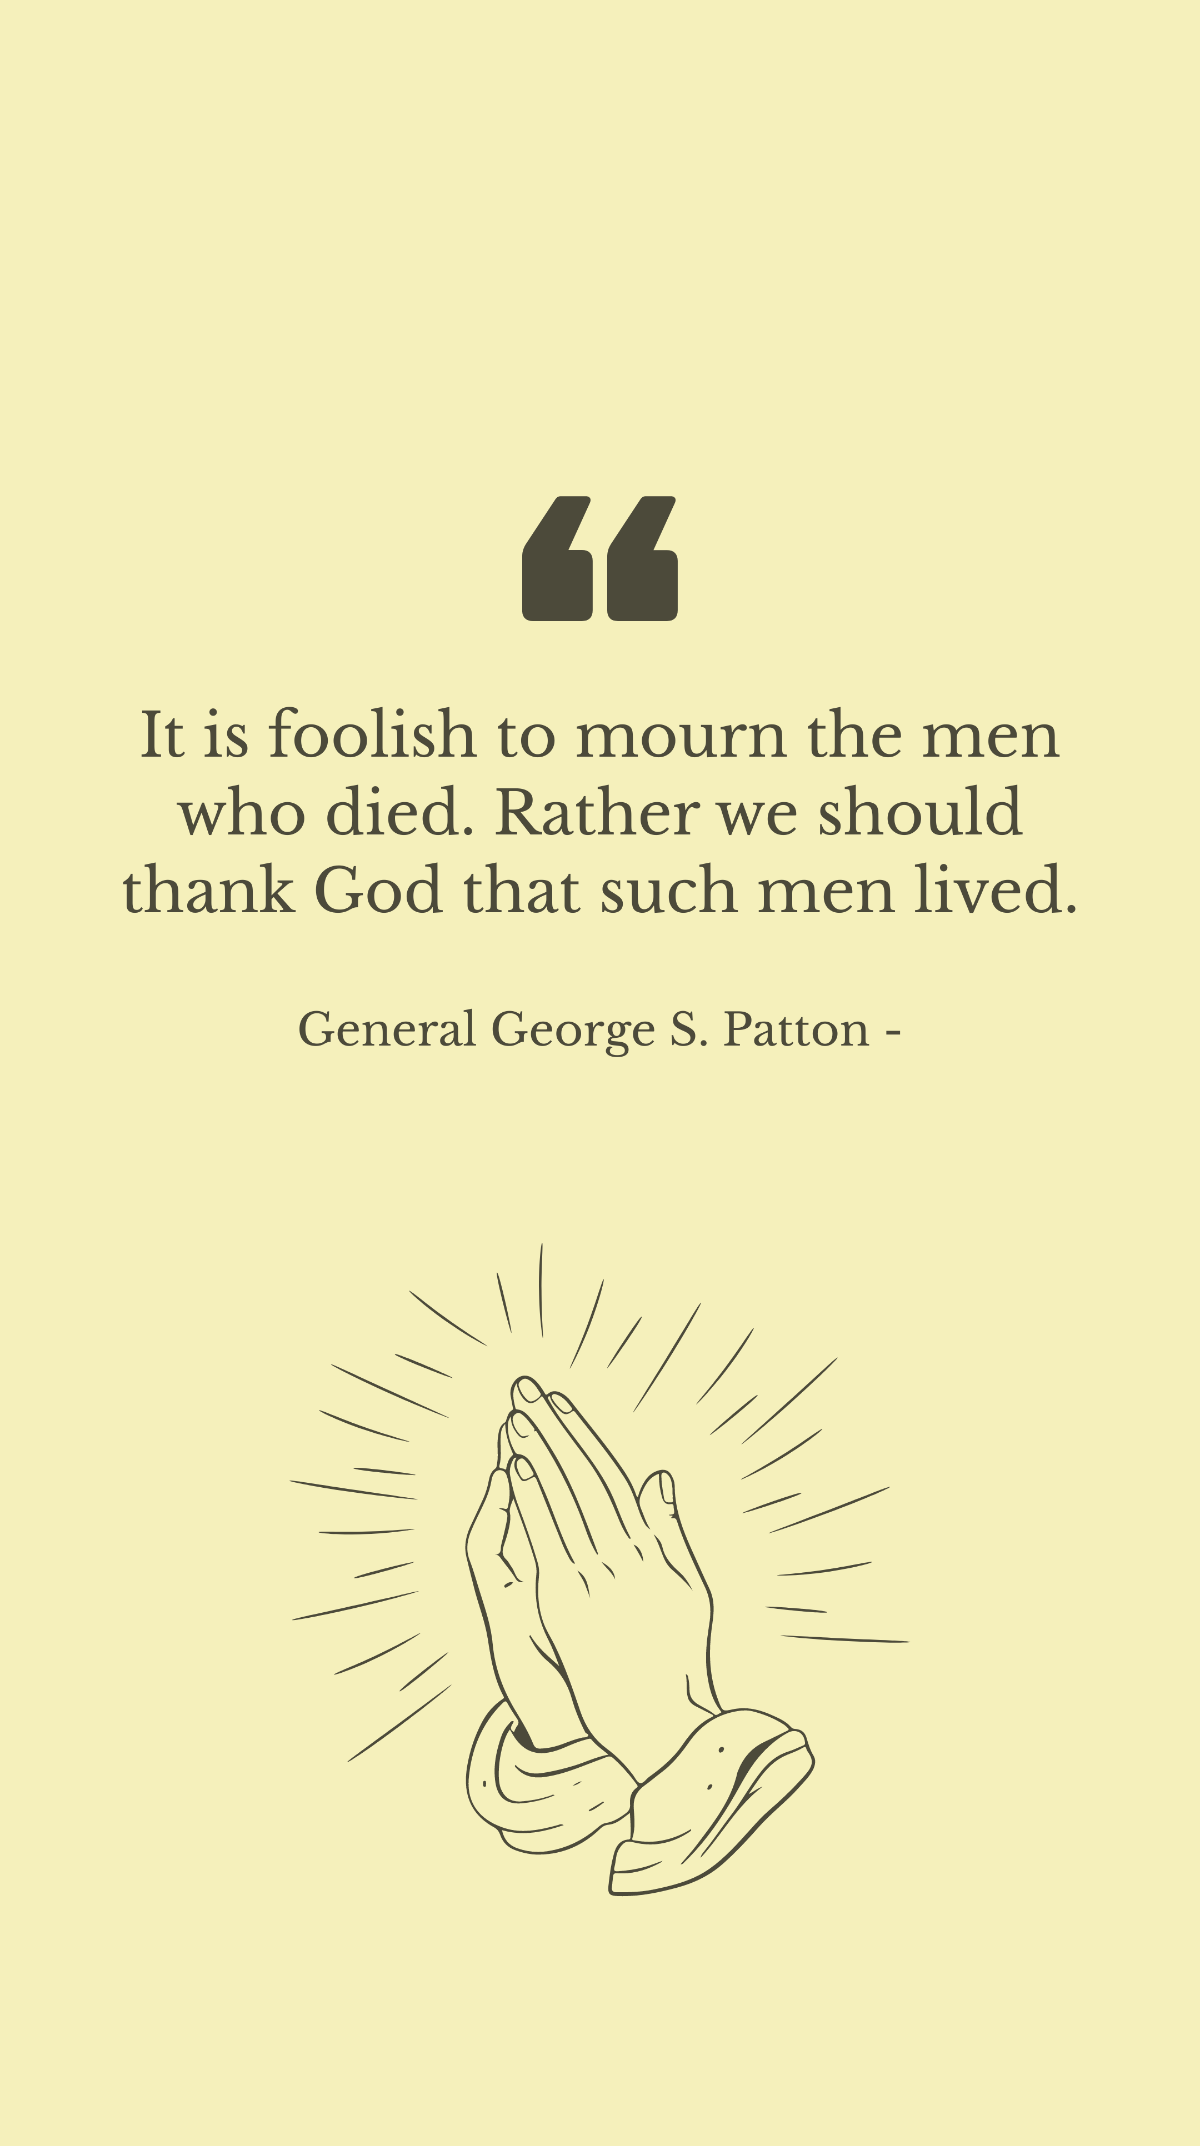 General George S. Patton - It is foolish to mourn the men who died. Rather we should thank God that such men lived. Template